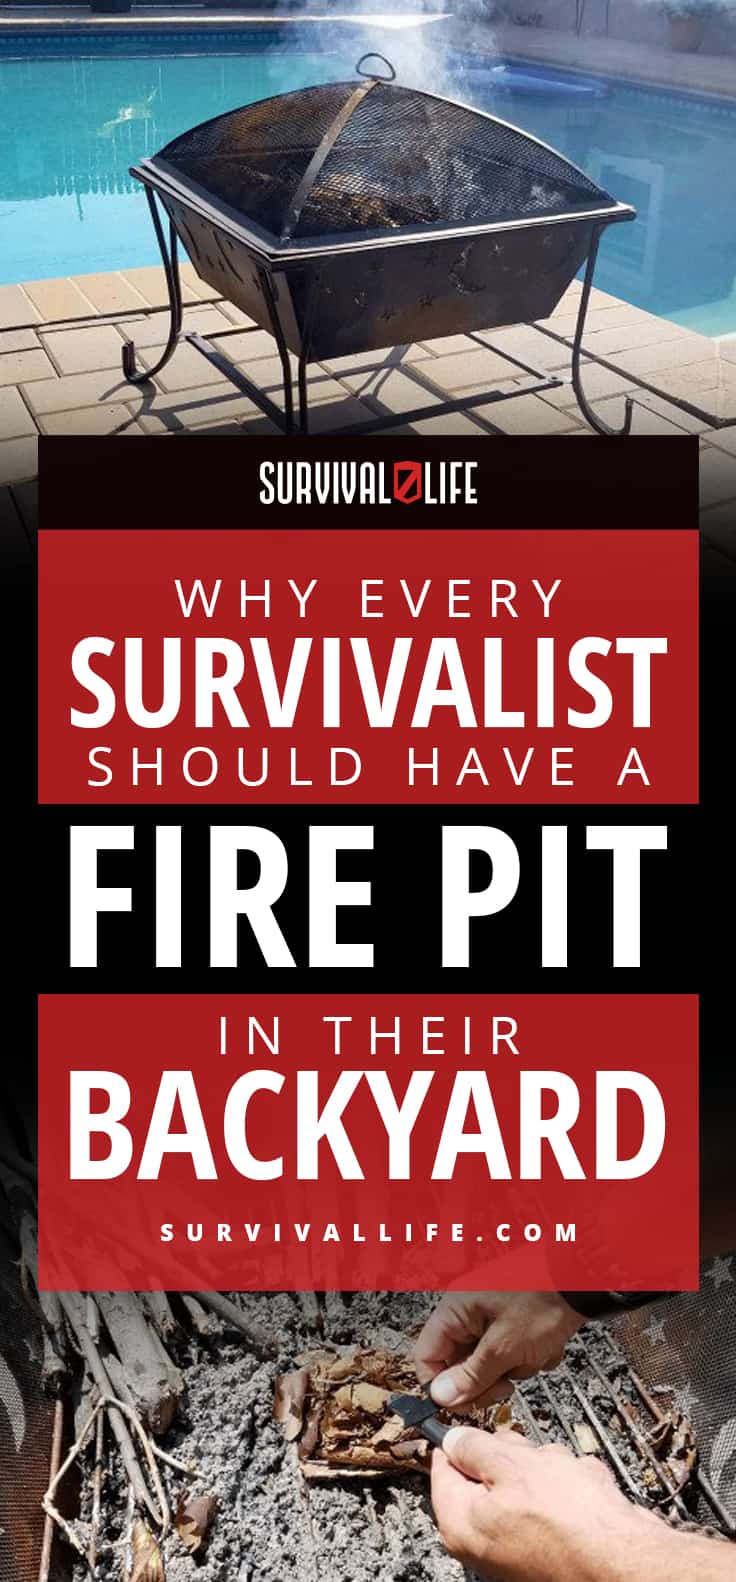 Fire Pit | Why Every Survivalist Should Have A Fire Pit In Their Backyard